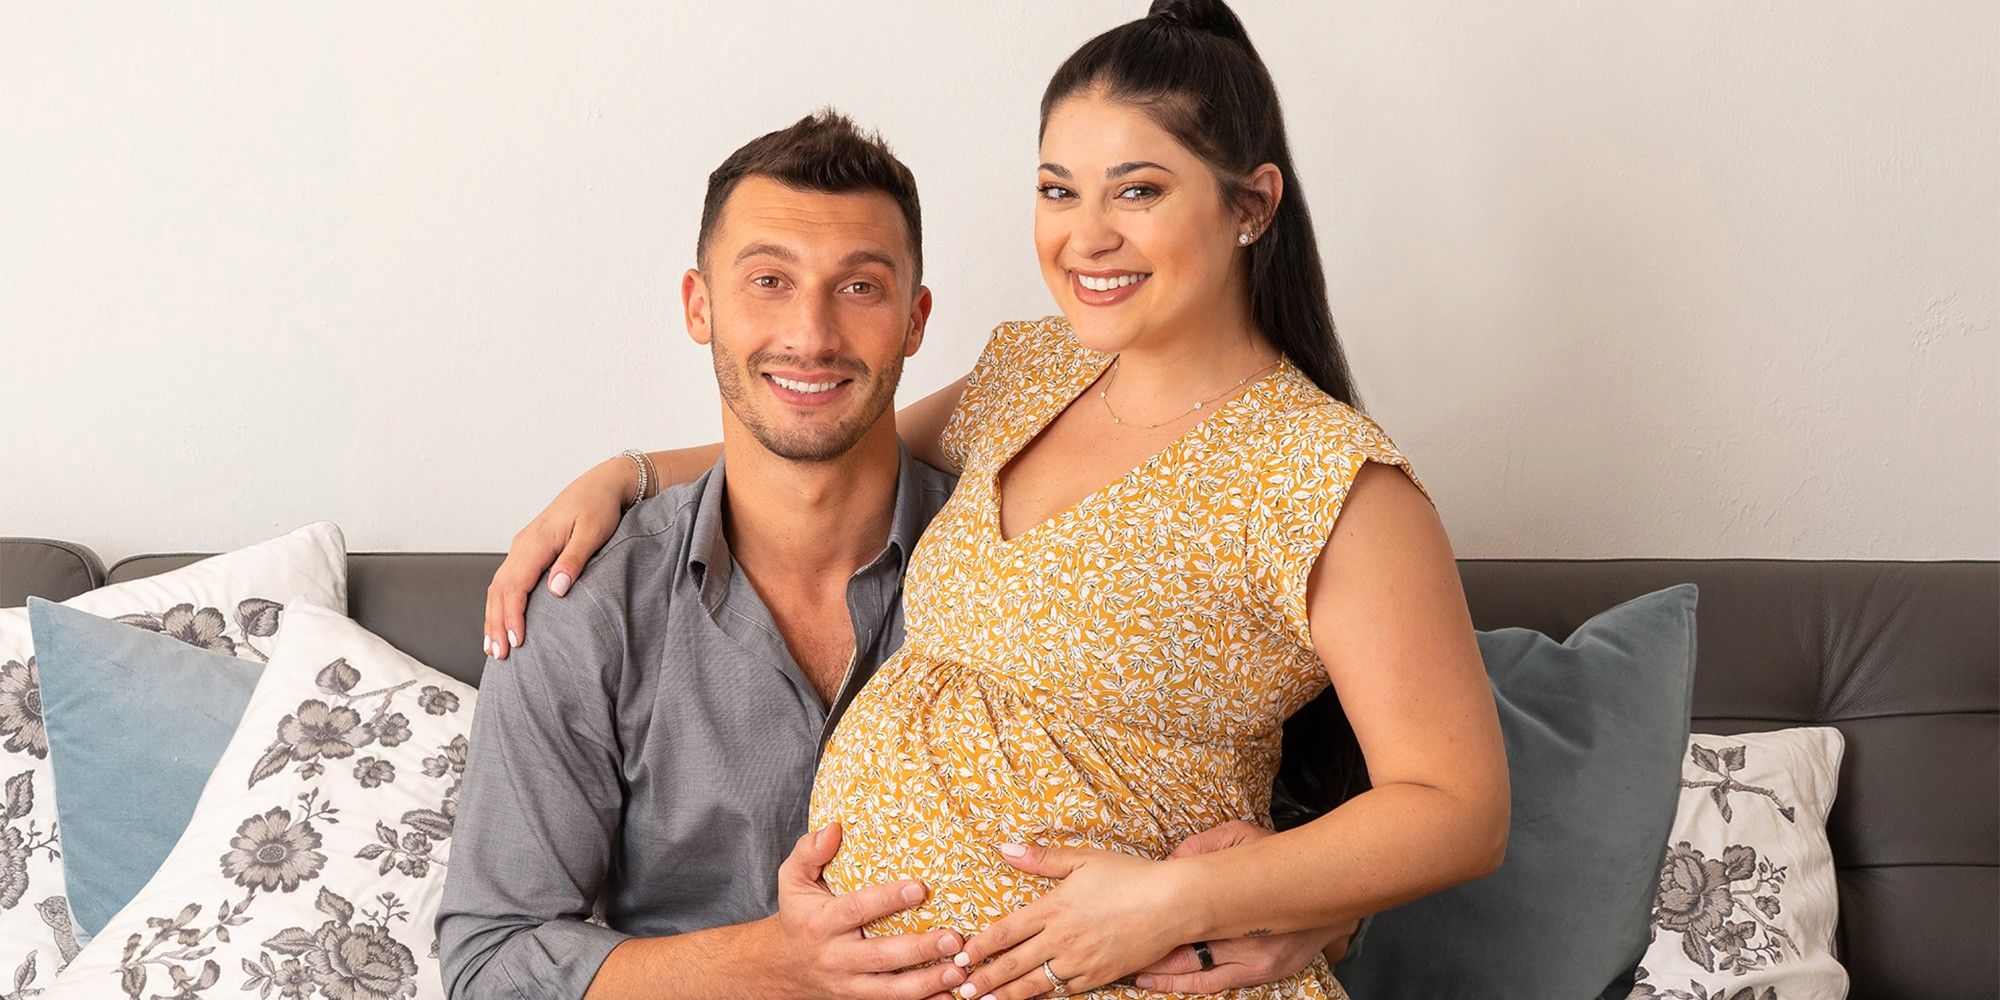 90 Day Fiancé: Why Viewers Dislike Loren & Alexei's New Spin-off